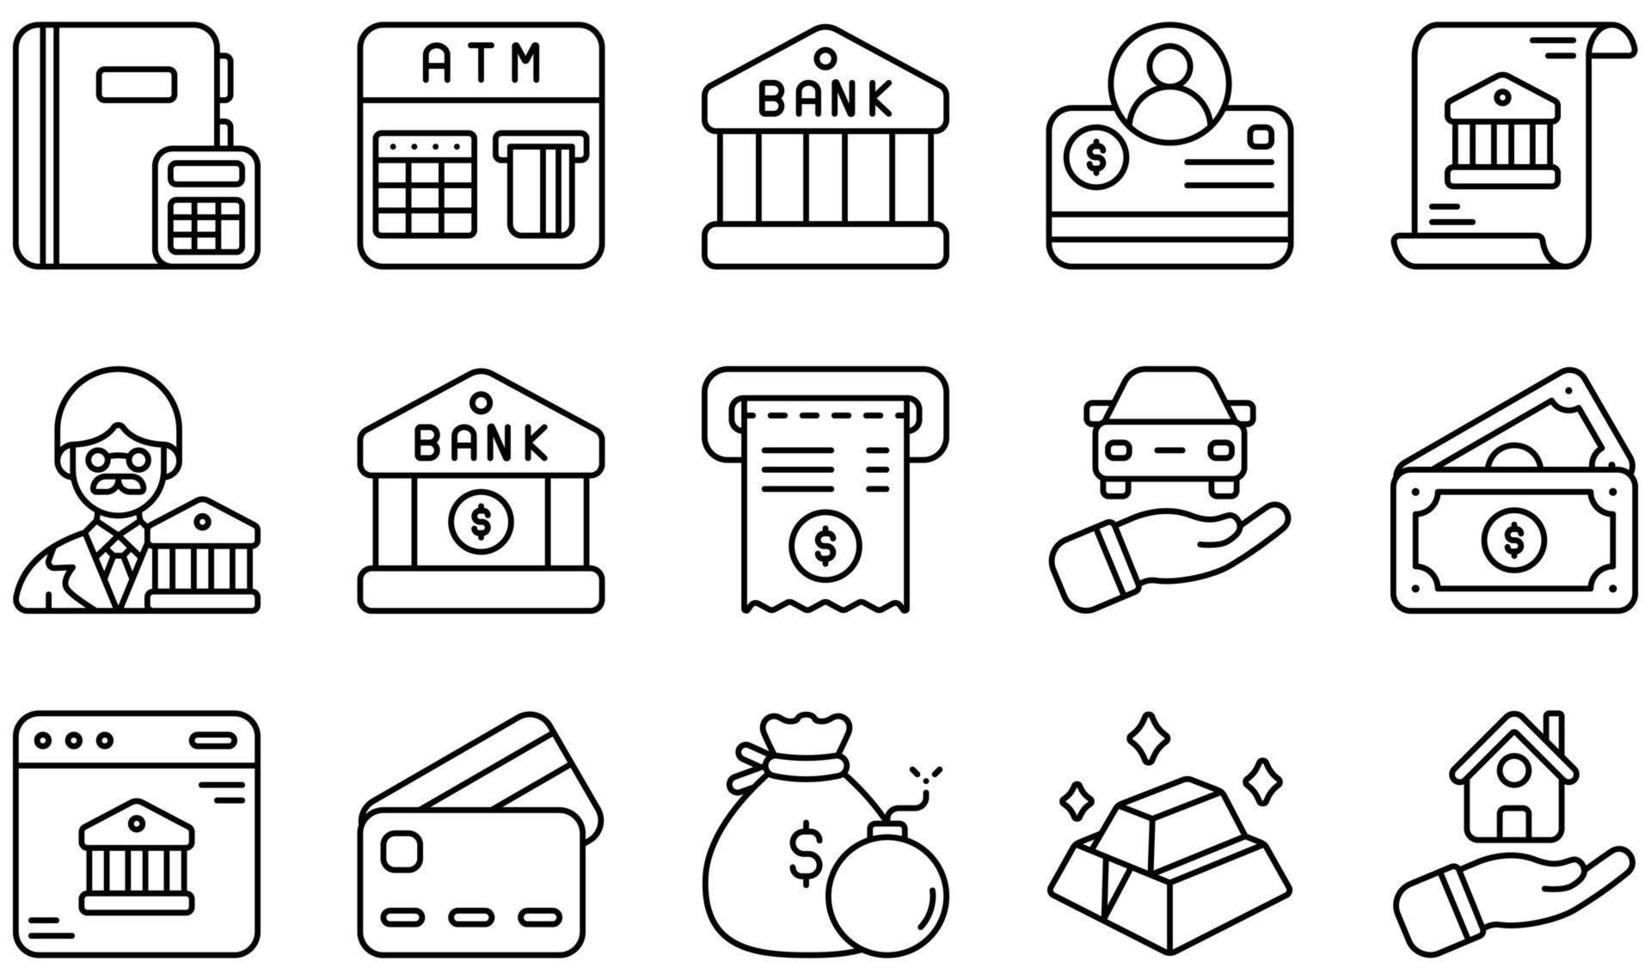 Set of Vector Icons Related to Banking. Contains such Icons as Accounting, Bank, Bank Account, Bank Statement, Banking, Banker and more.